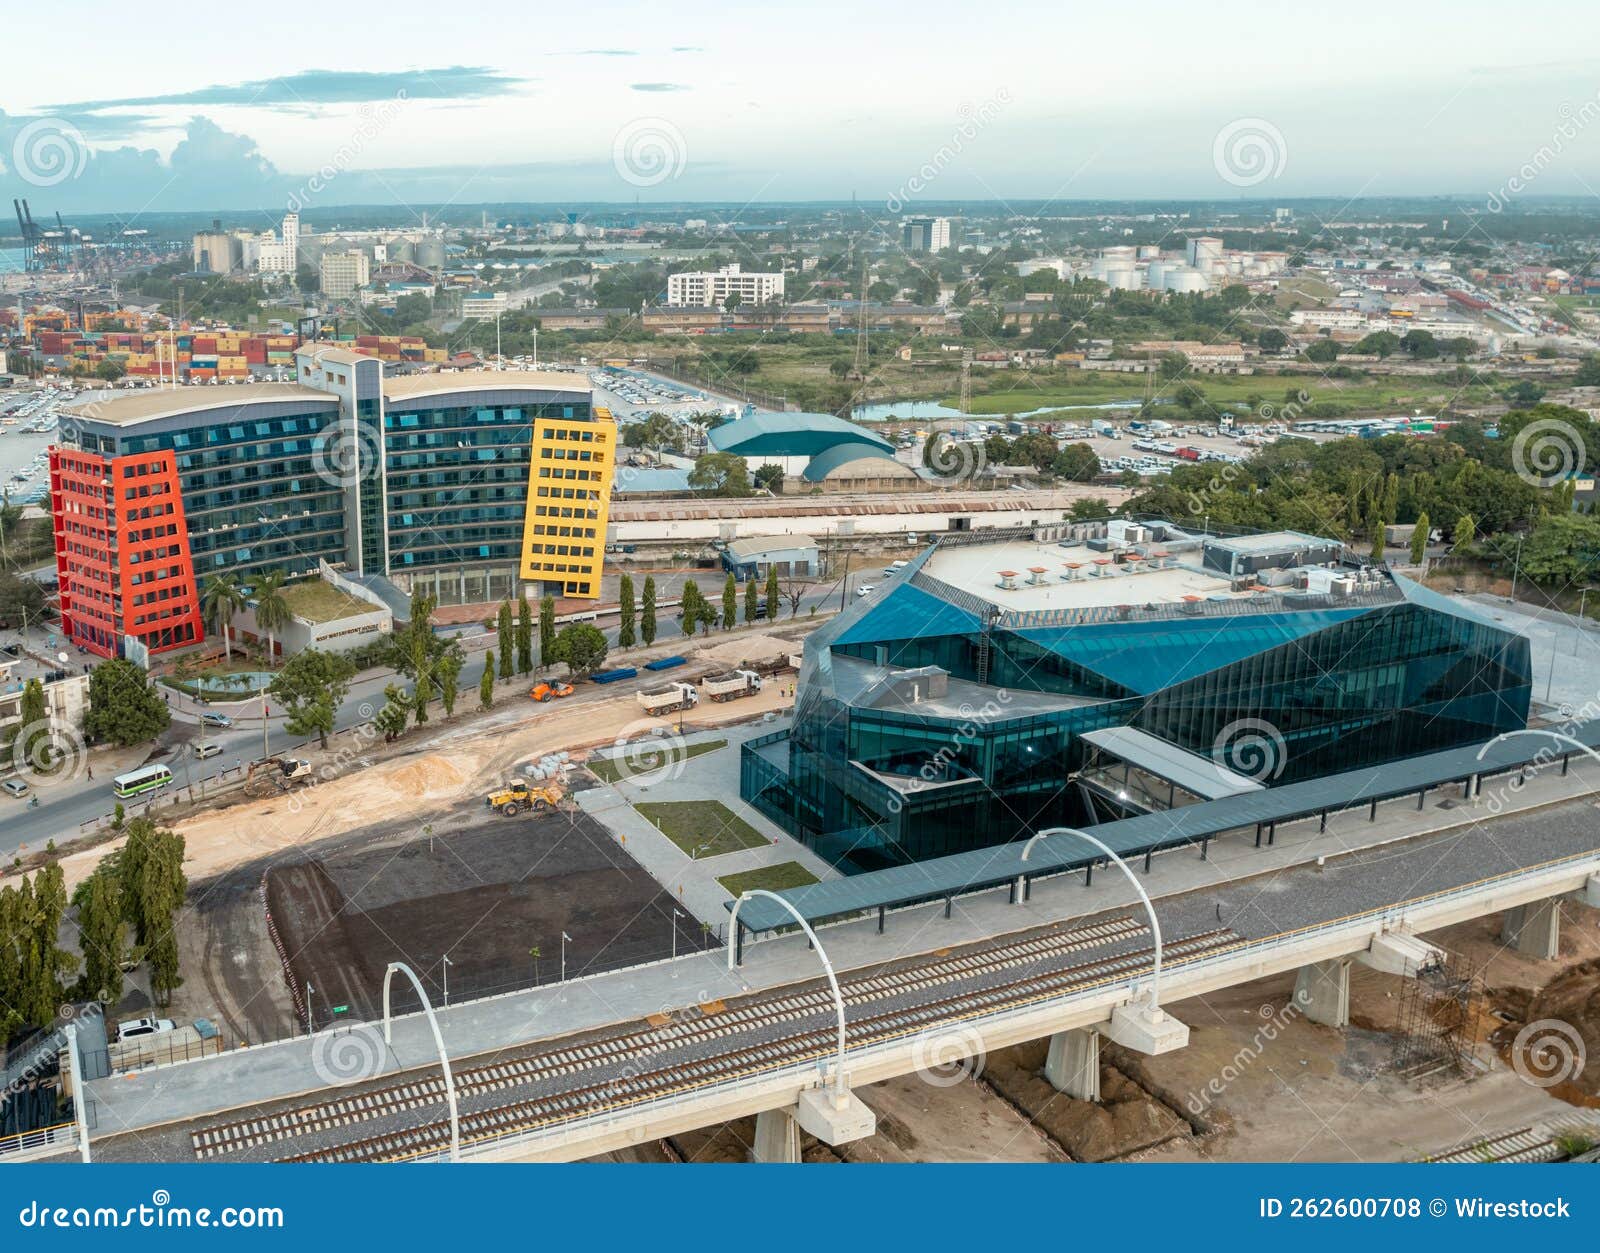 aerial shot of a dar es salaam new train station next to the colorful building